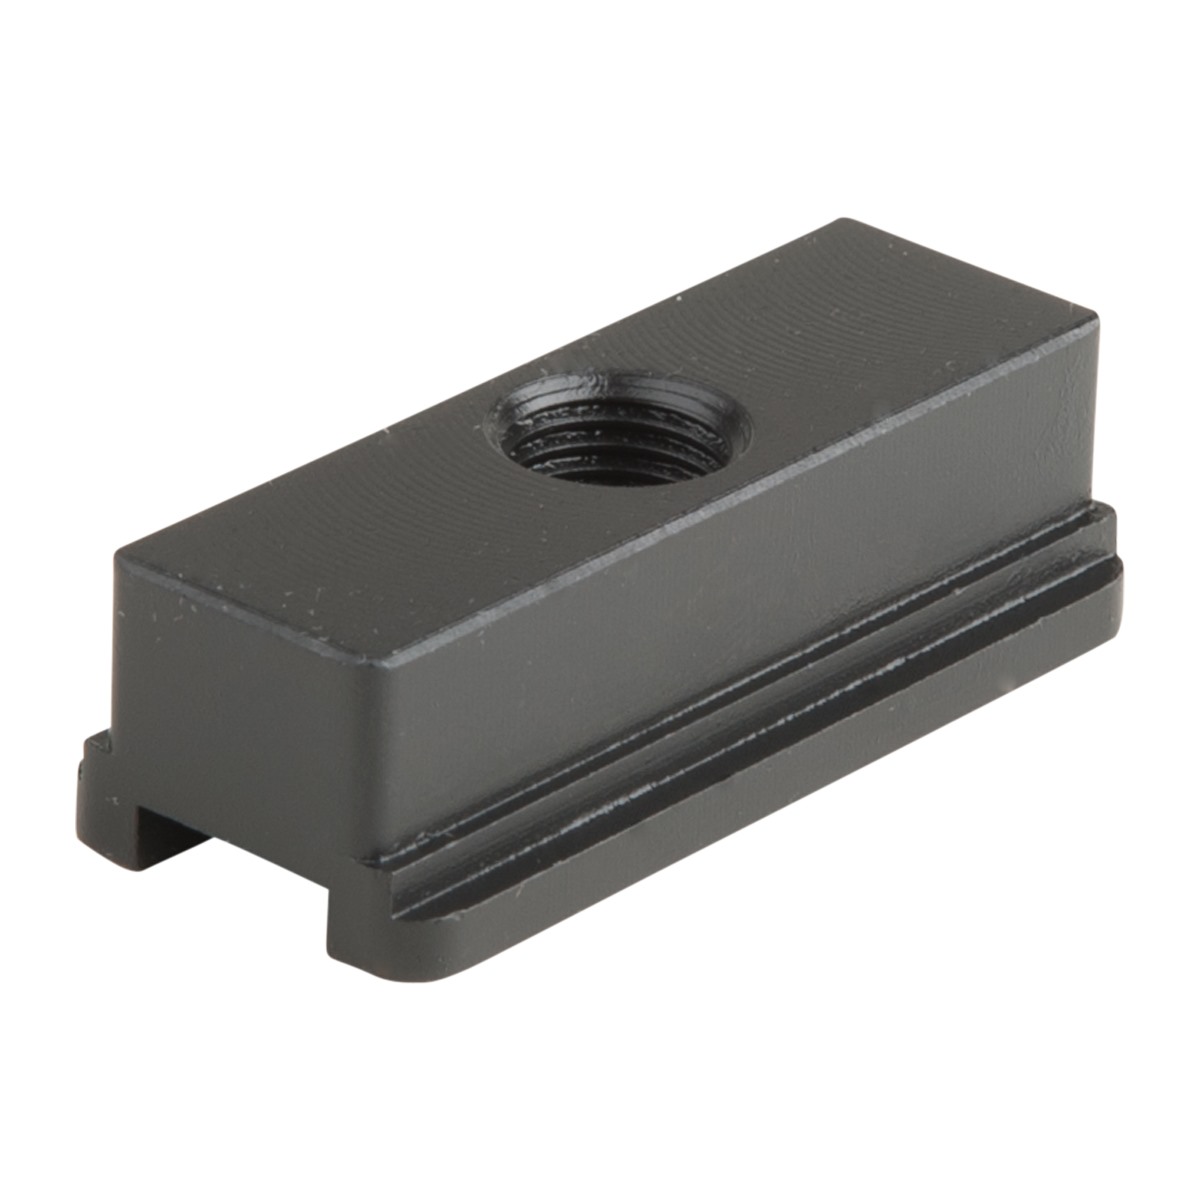 MGW Armory MGWSP107 For S&W Gen3 Shoe Plate For RangeMaster Universal Sight Tool